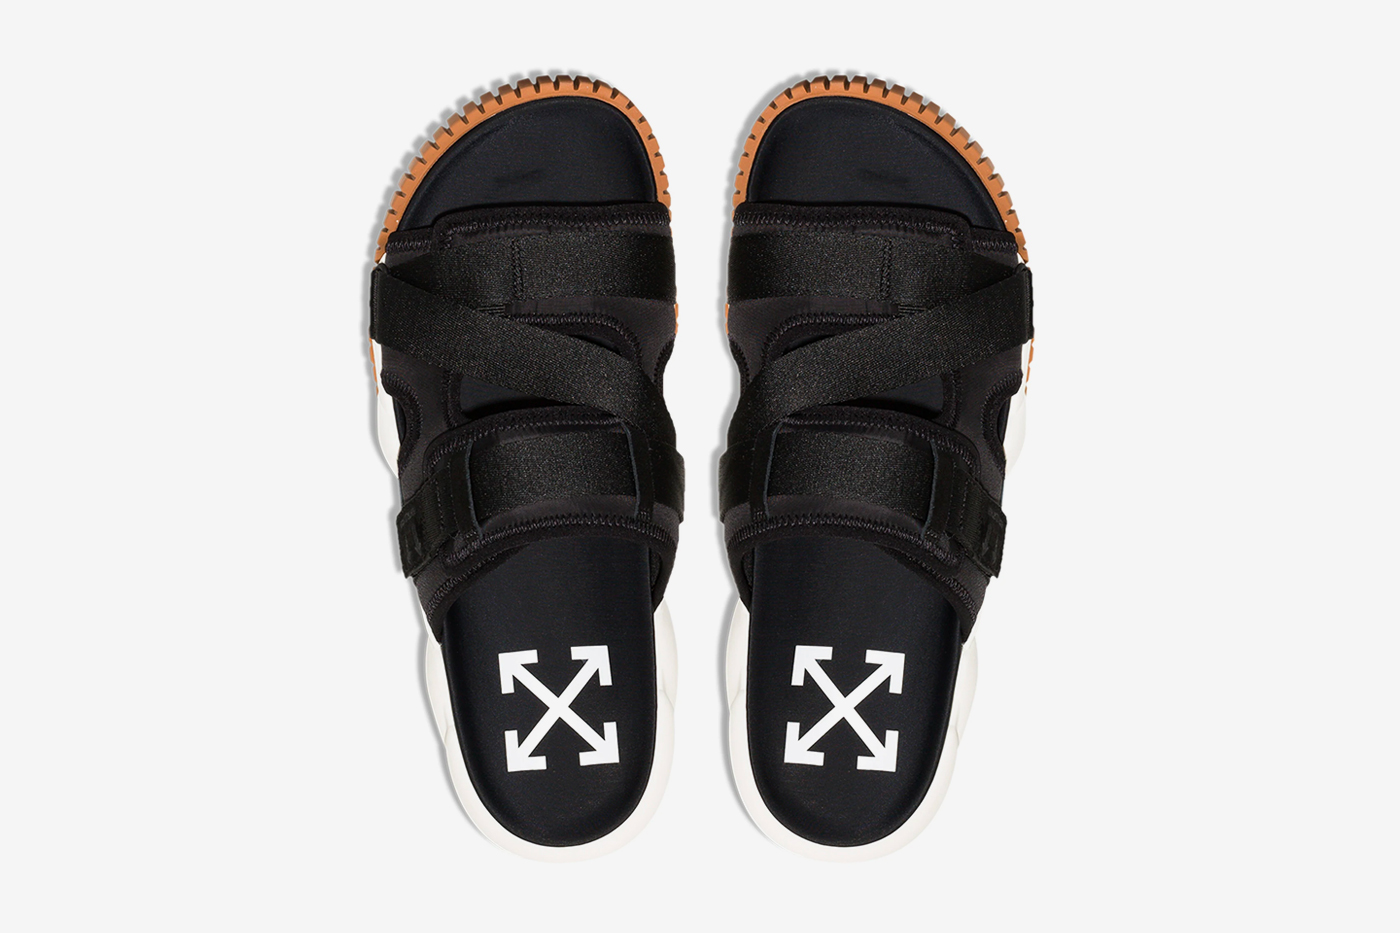 Off-White™ ODSY Sandal Release Price/Date 2020 | Drops | Hypebeast